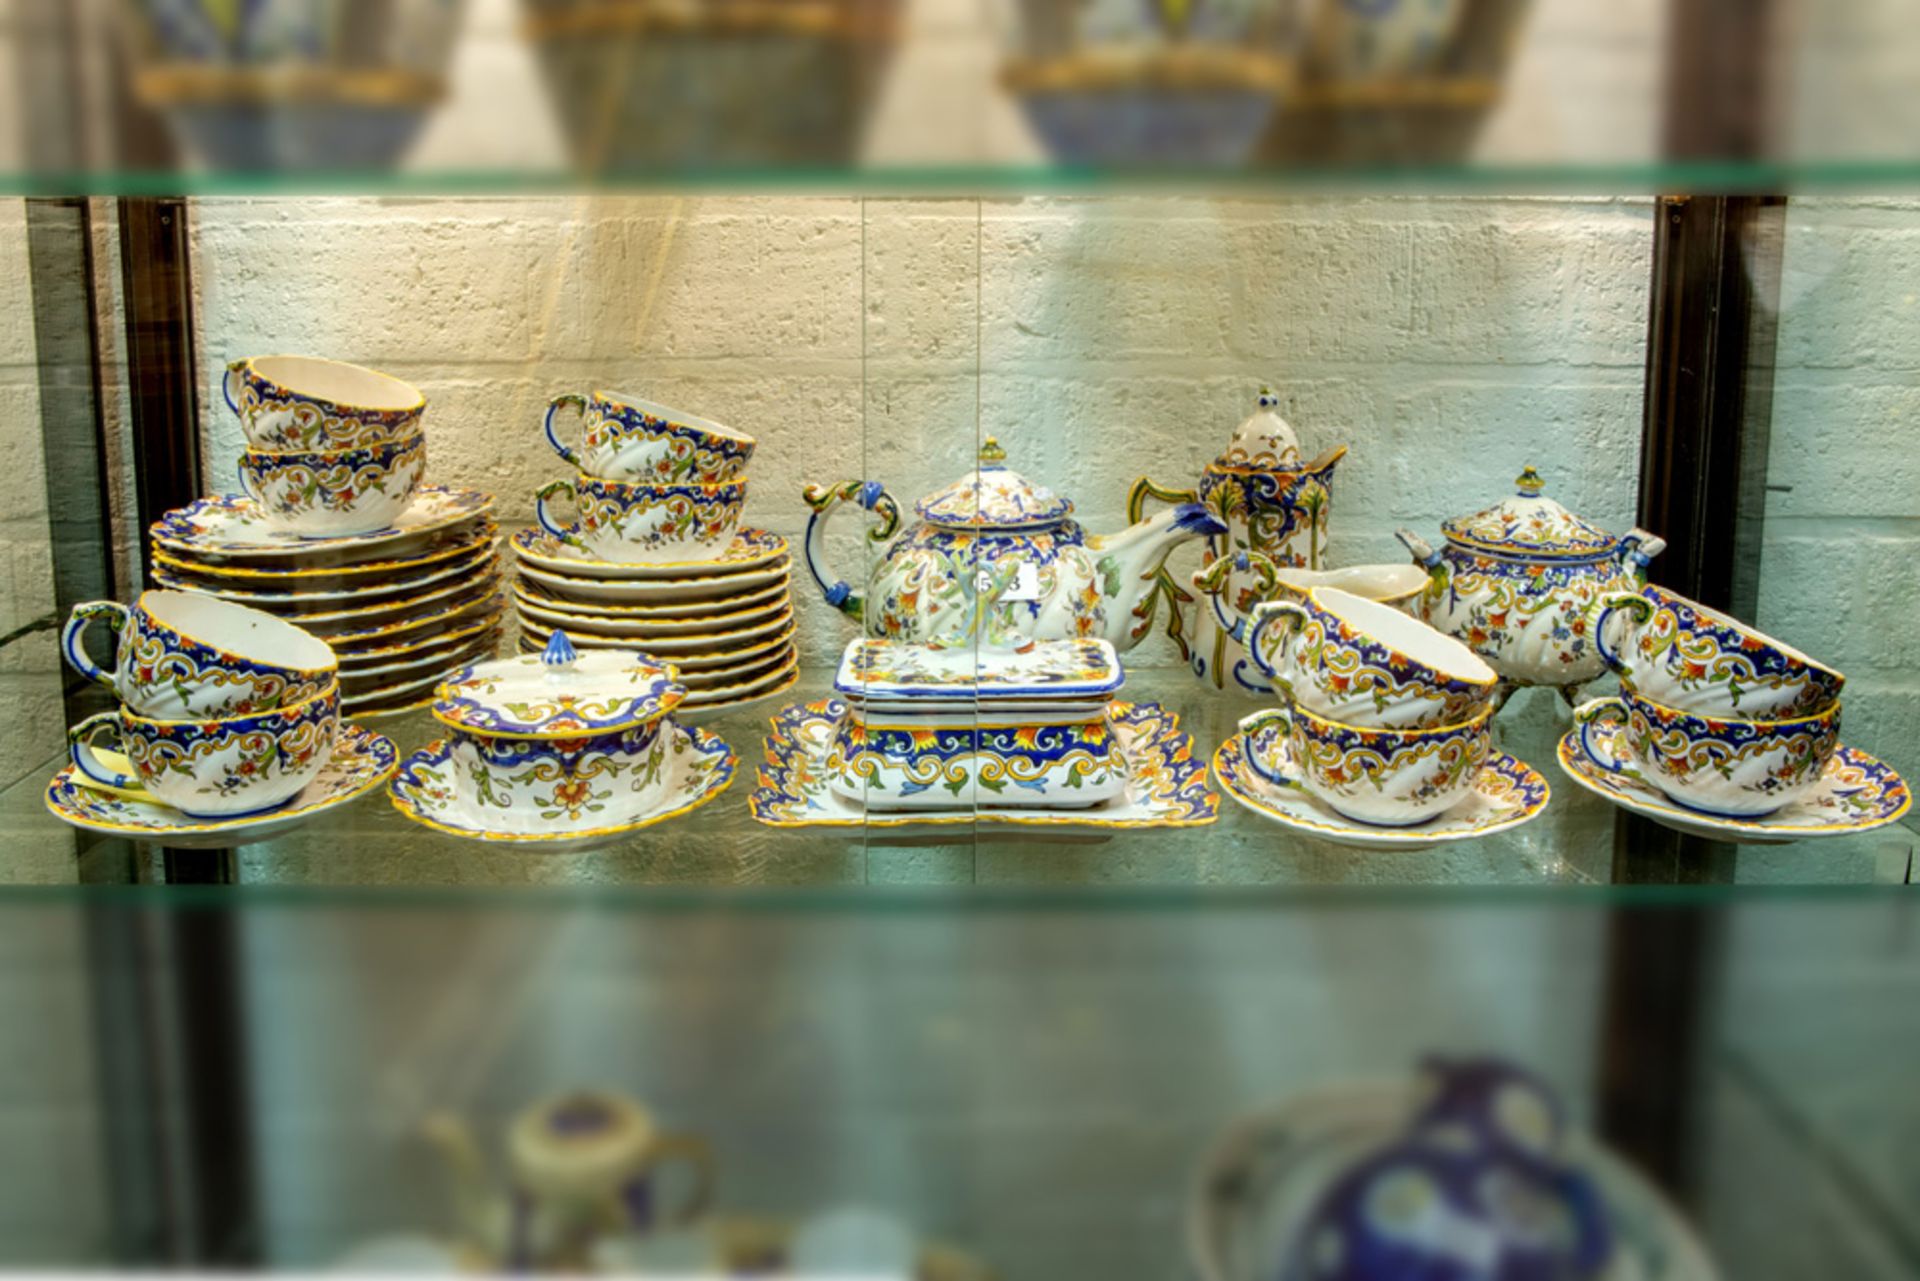 37 pcs French coffee set in ceramic from Rouen with a typical polychrome decor || 37-delig servies - Image 4 of 4